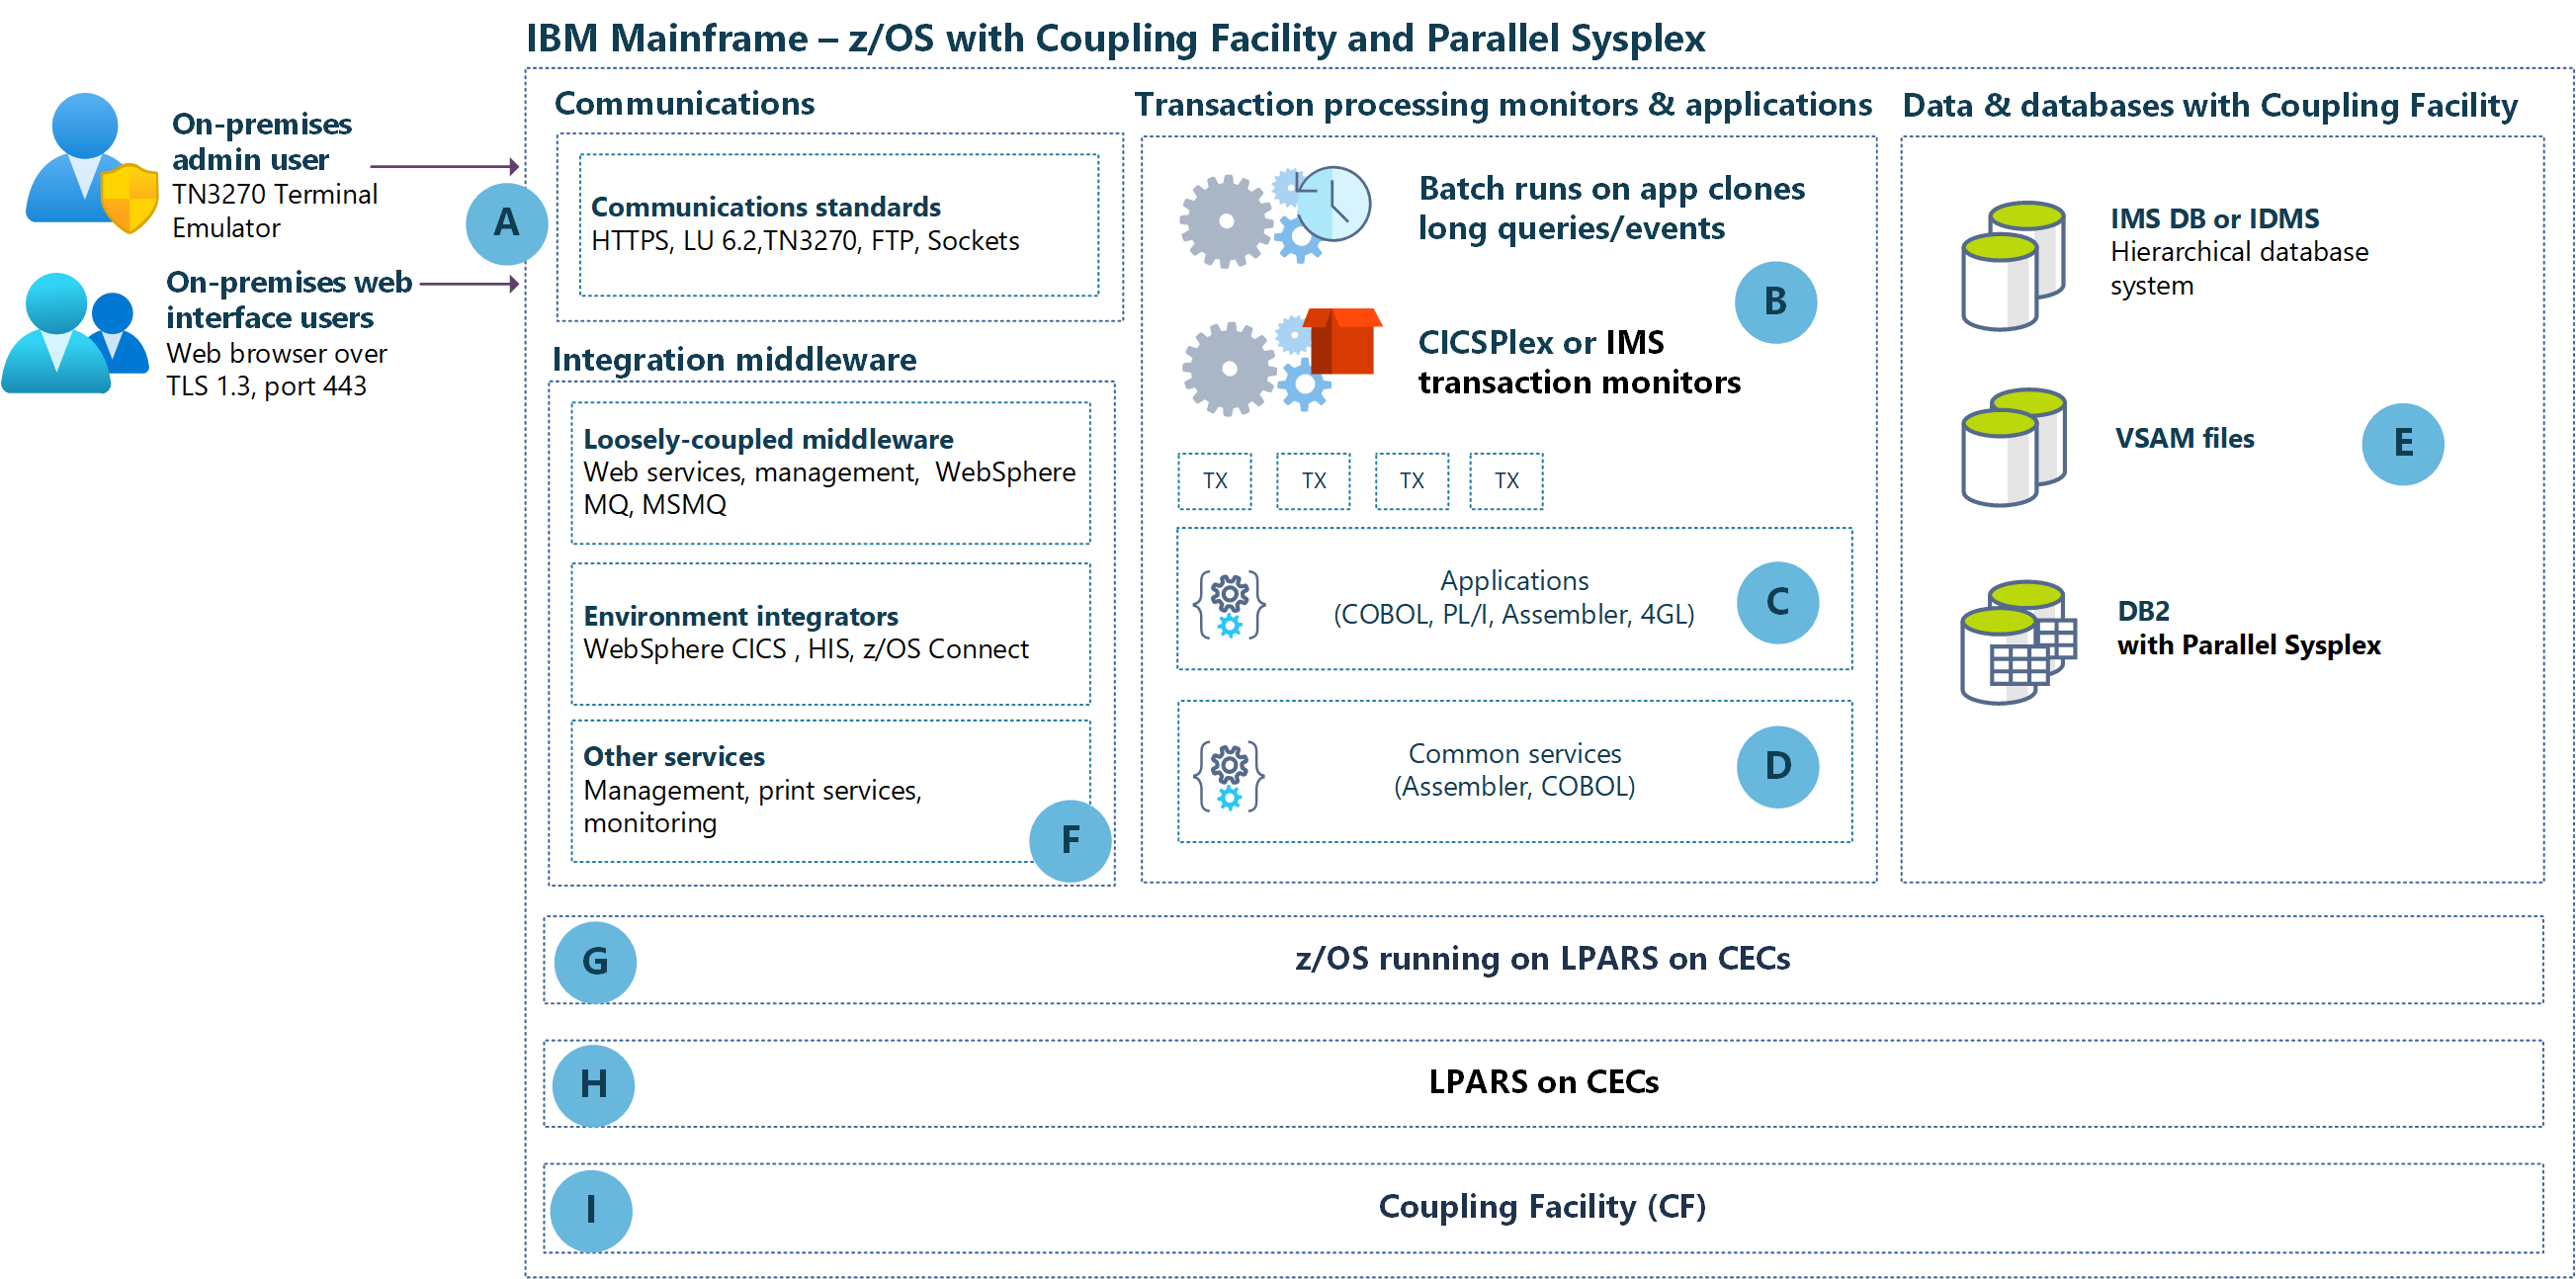 Diagram showing IBM z/OS mainframe architecture with Coupling Facility and Parallel Sysplex components.